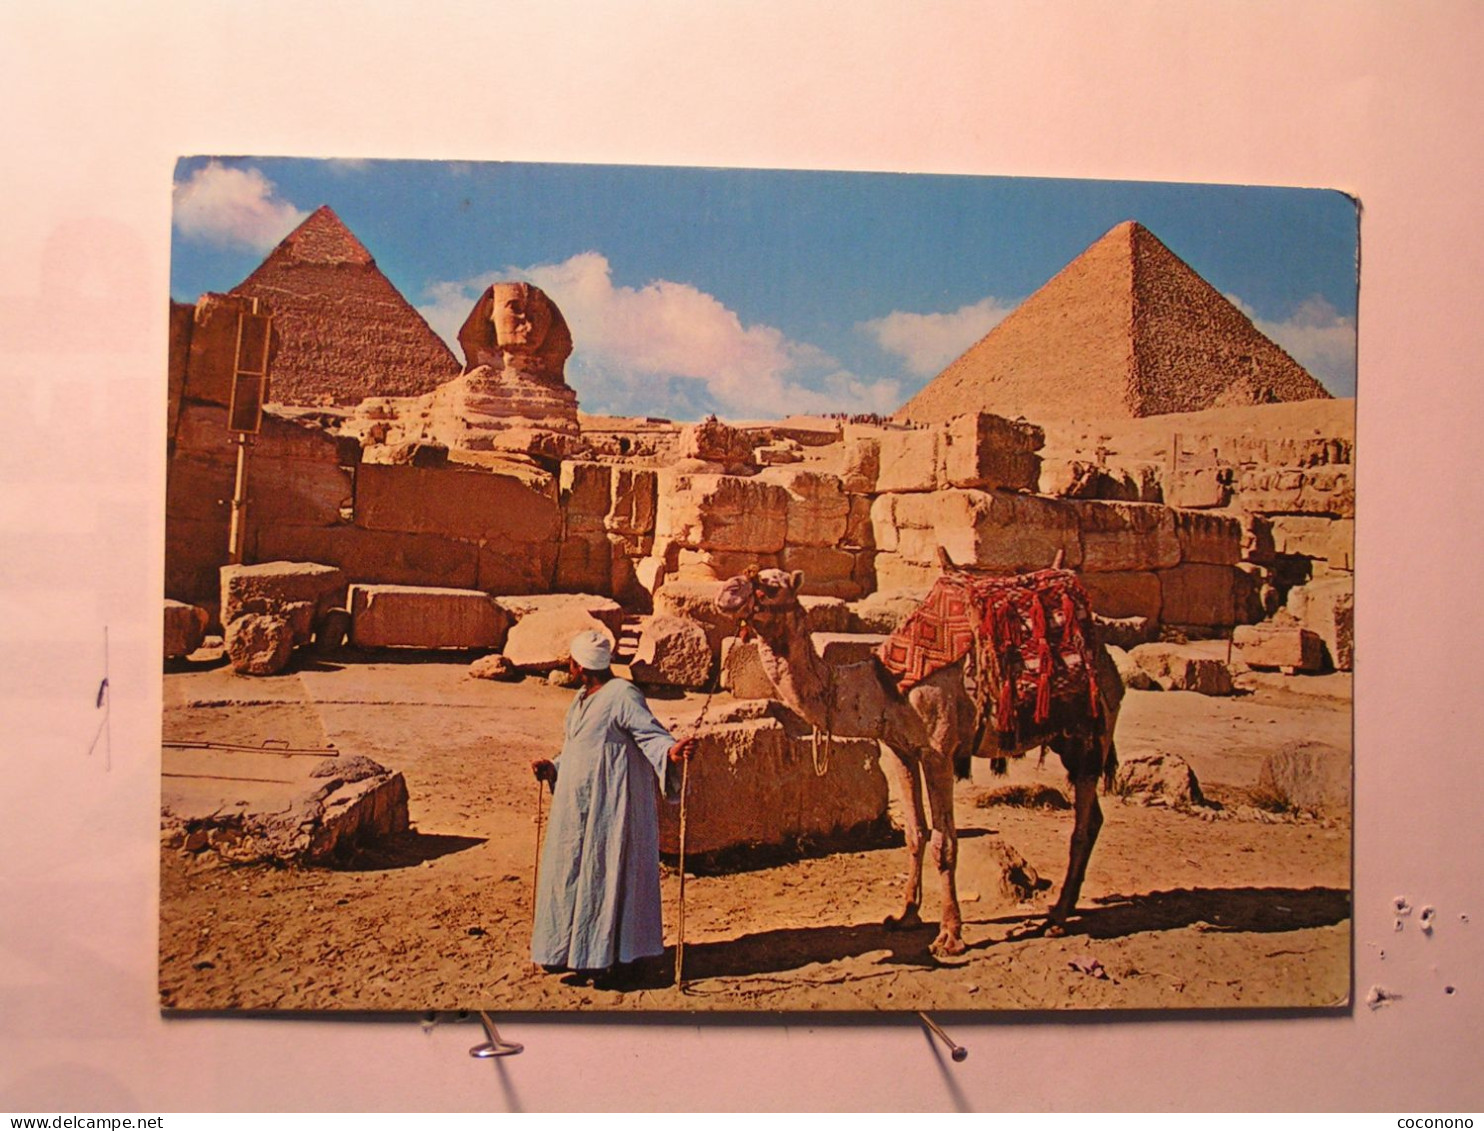 Giza - The Great Sphinx And Keops Pyramid - Gizeh